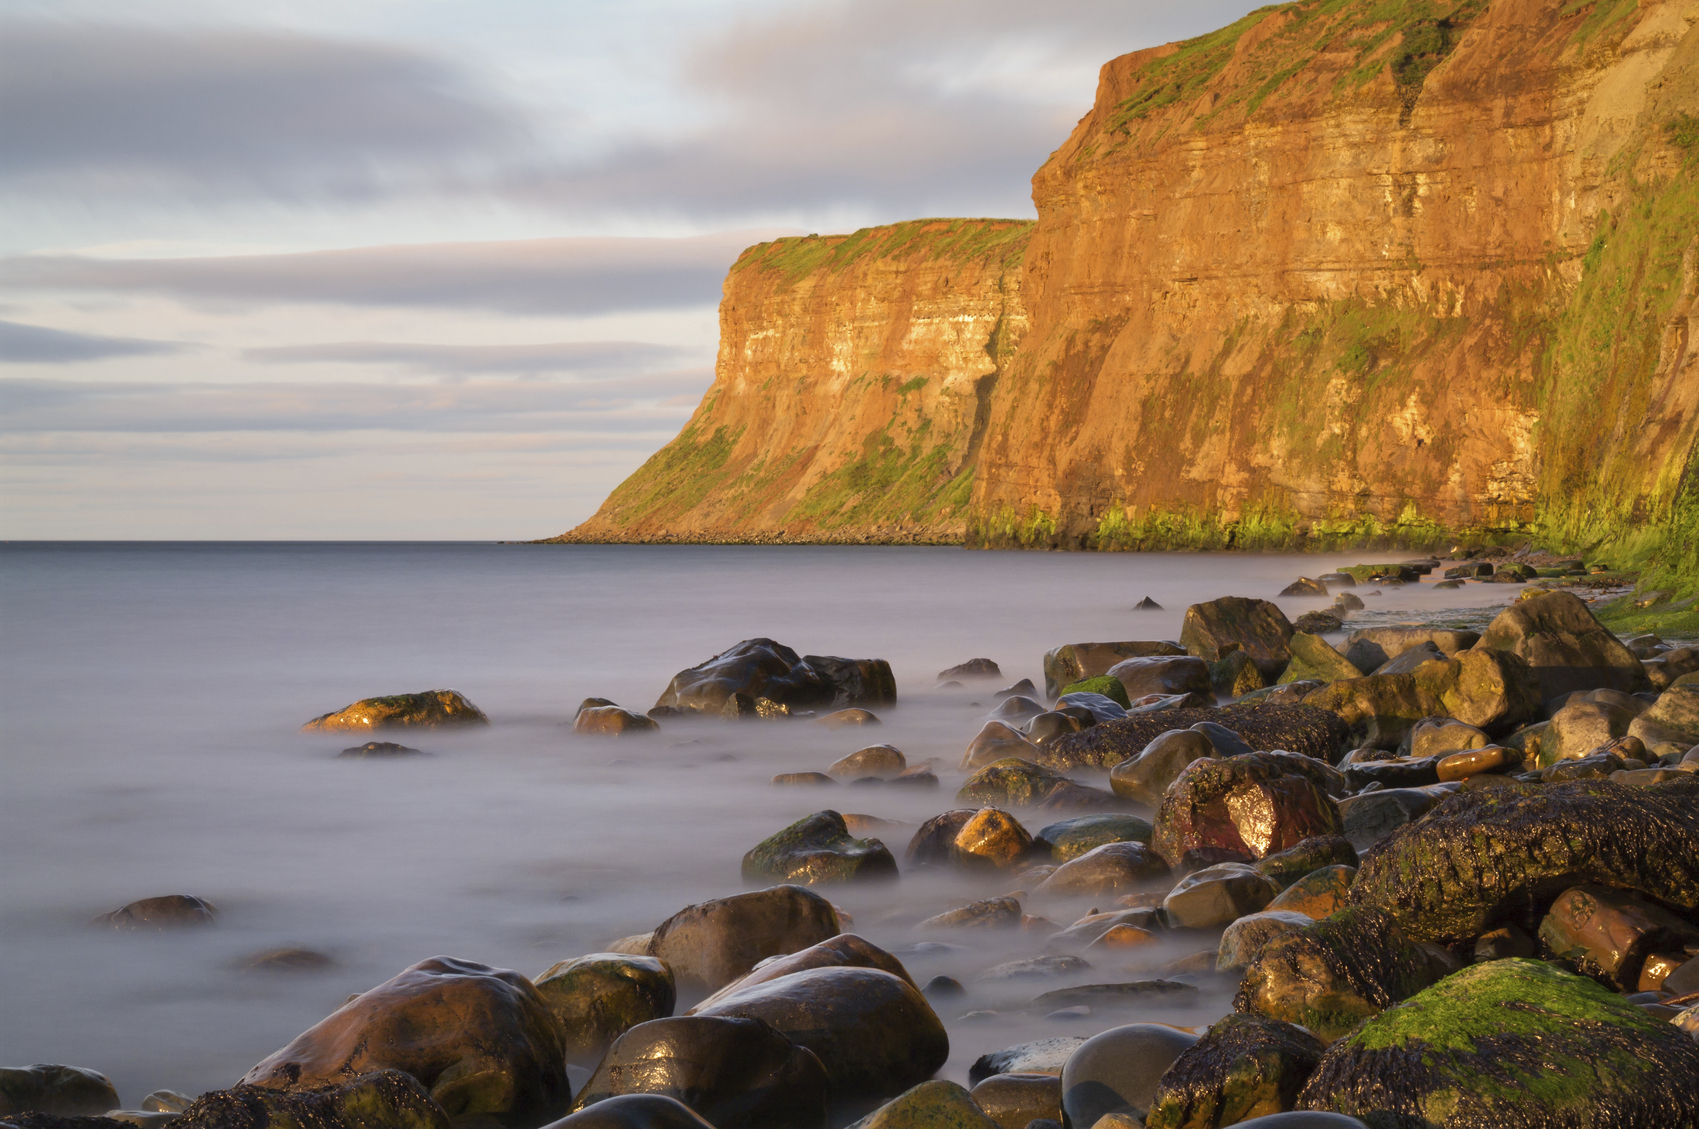 Hunt Cliff or Huntcliff at Saltburn by-the-sea.